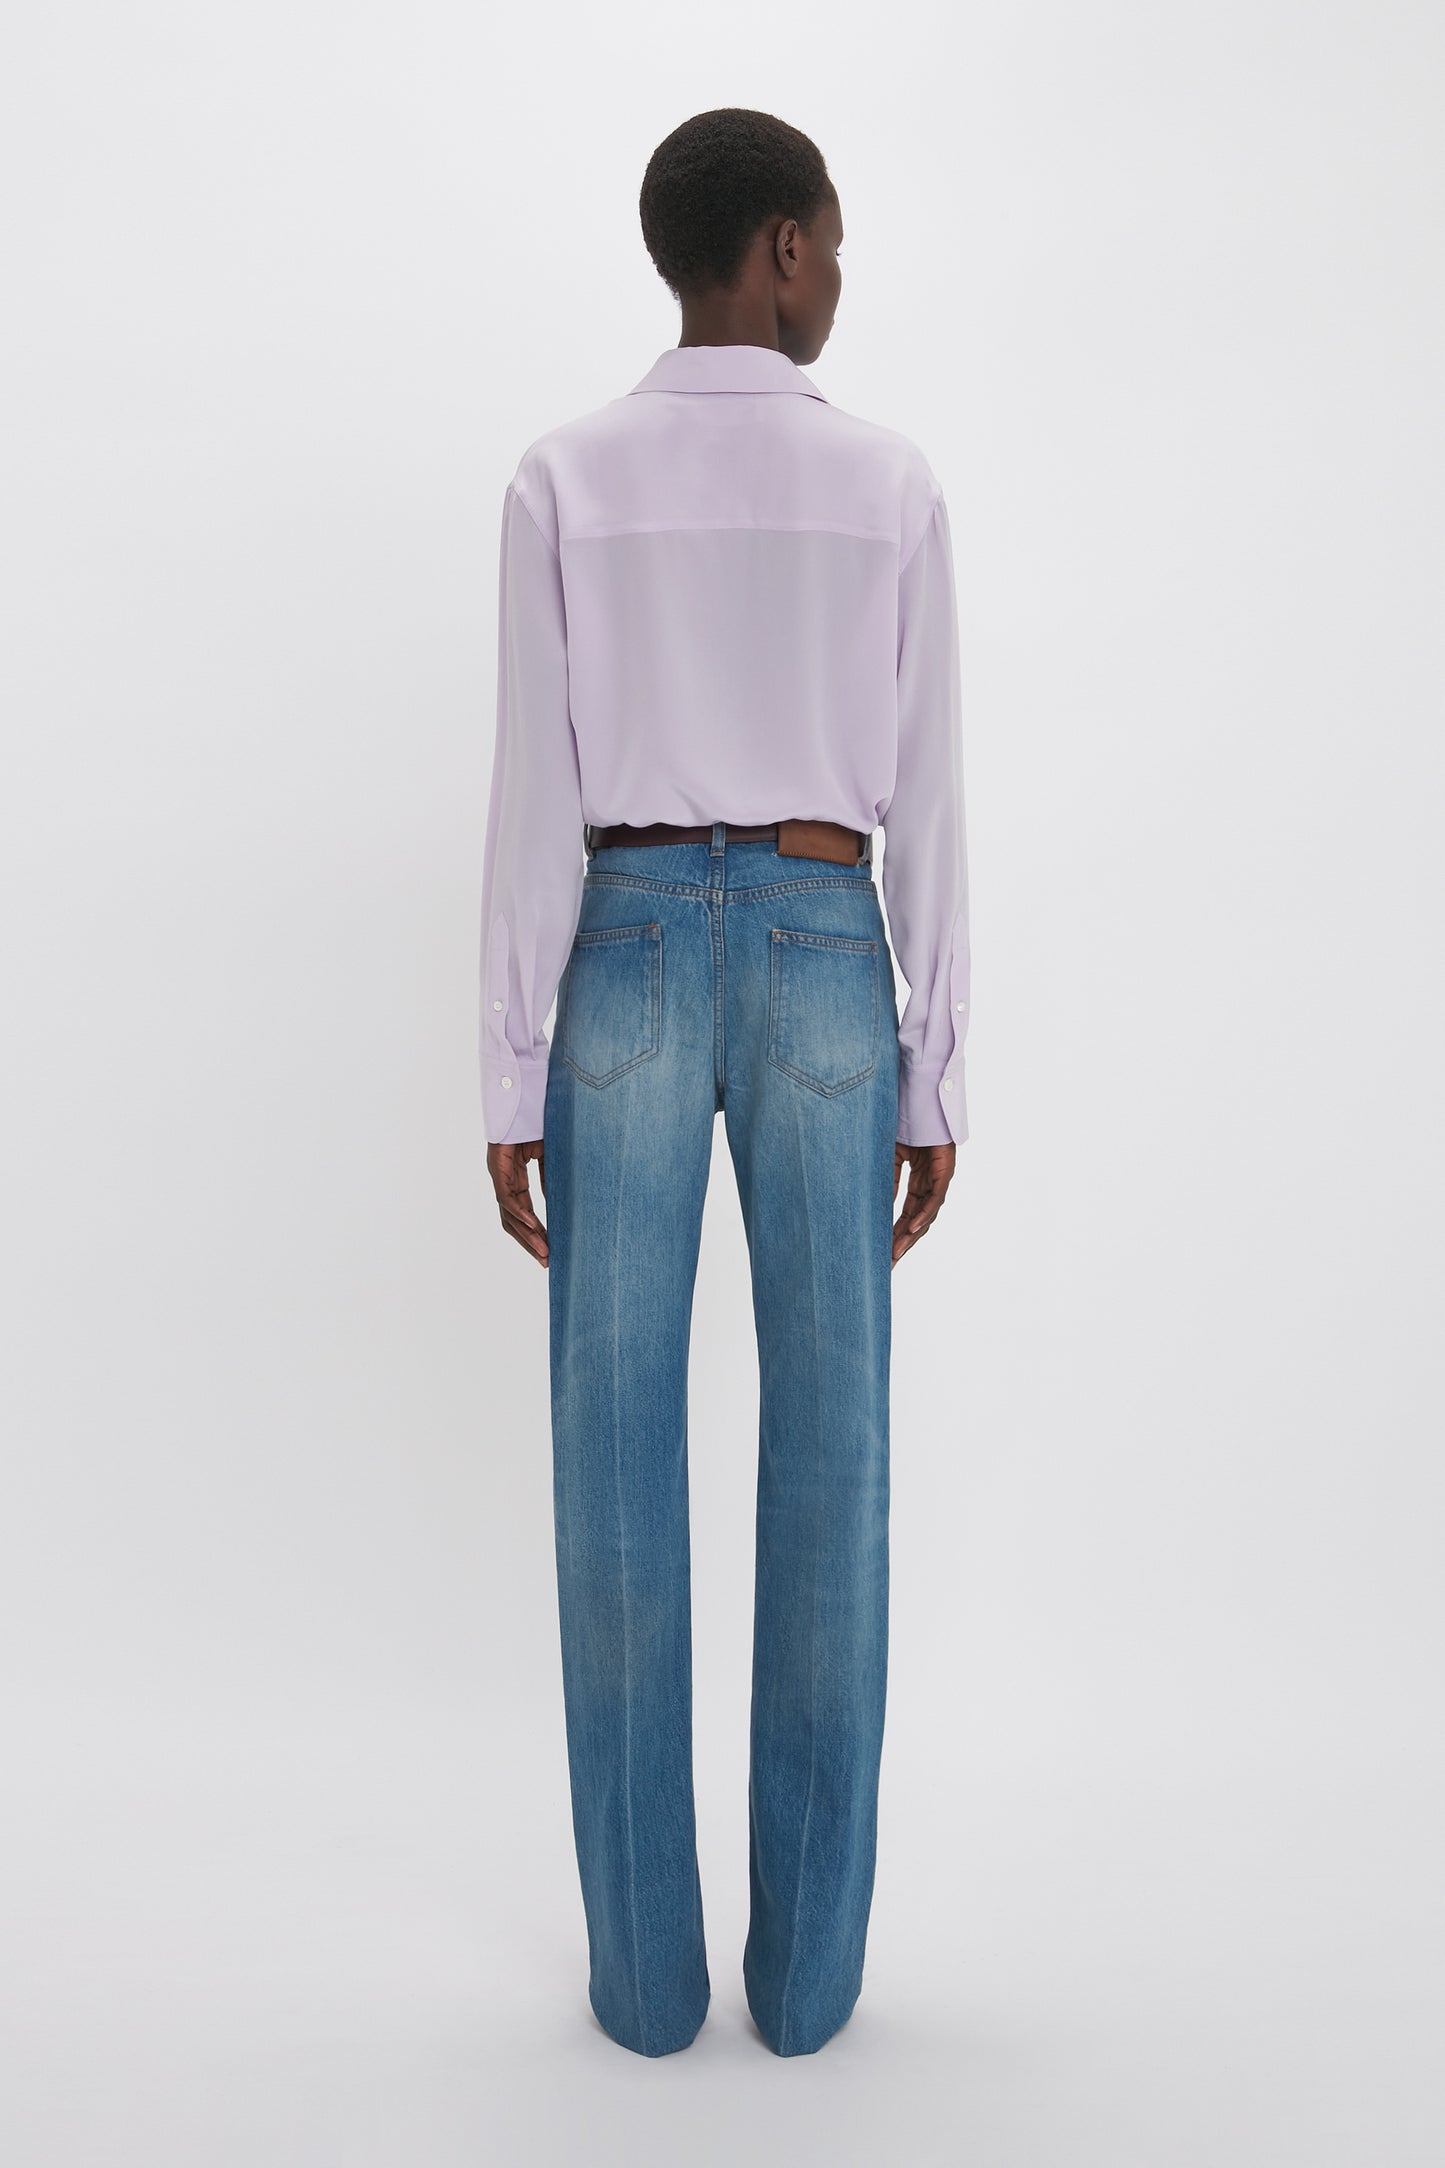 A person stands with their back to the camera, wearing a Victoria Beckham Asymmetric Ruffle Blouse in Petunia and classic blue jeans, against a plain white background.